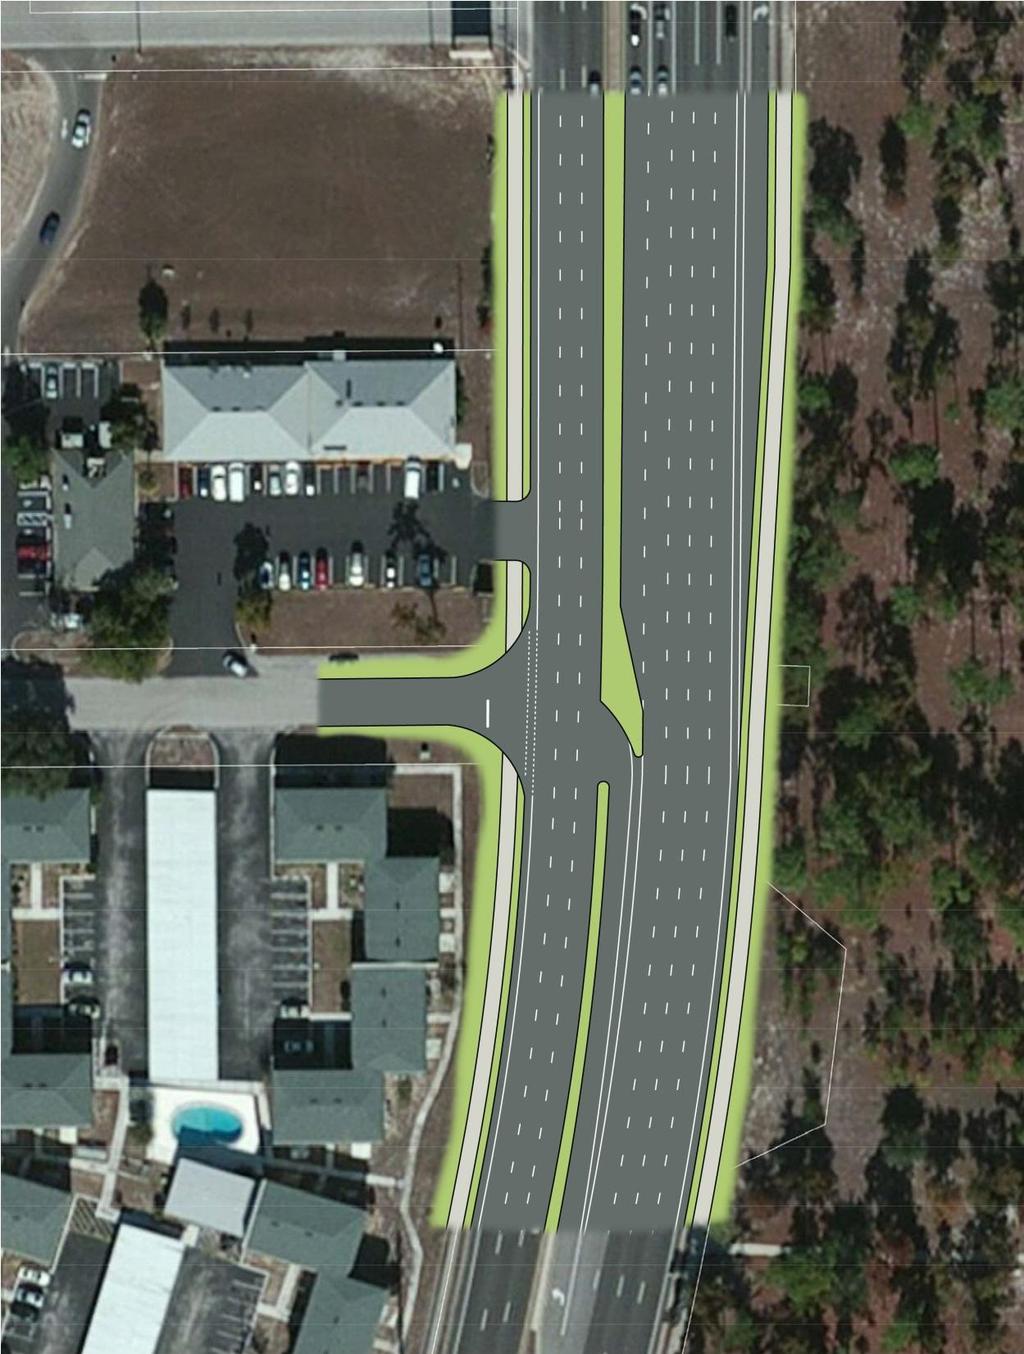 TYPICAL MINOR ROAD/ DRIVEWAY INTERSECTION DESIGN CONCEPTS Reduce turn radii on all corners to a maximum of 25 Textured pavement crosswalks or